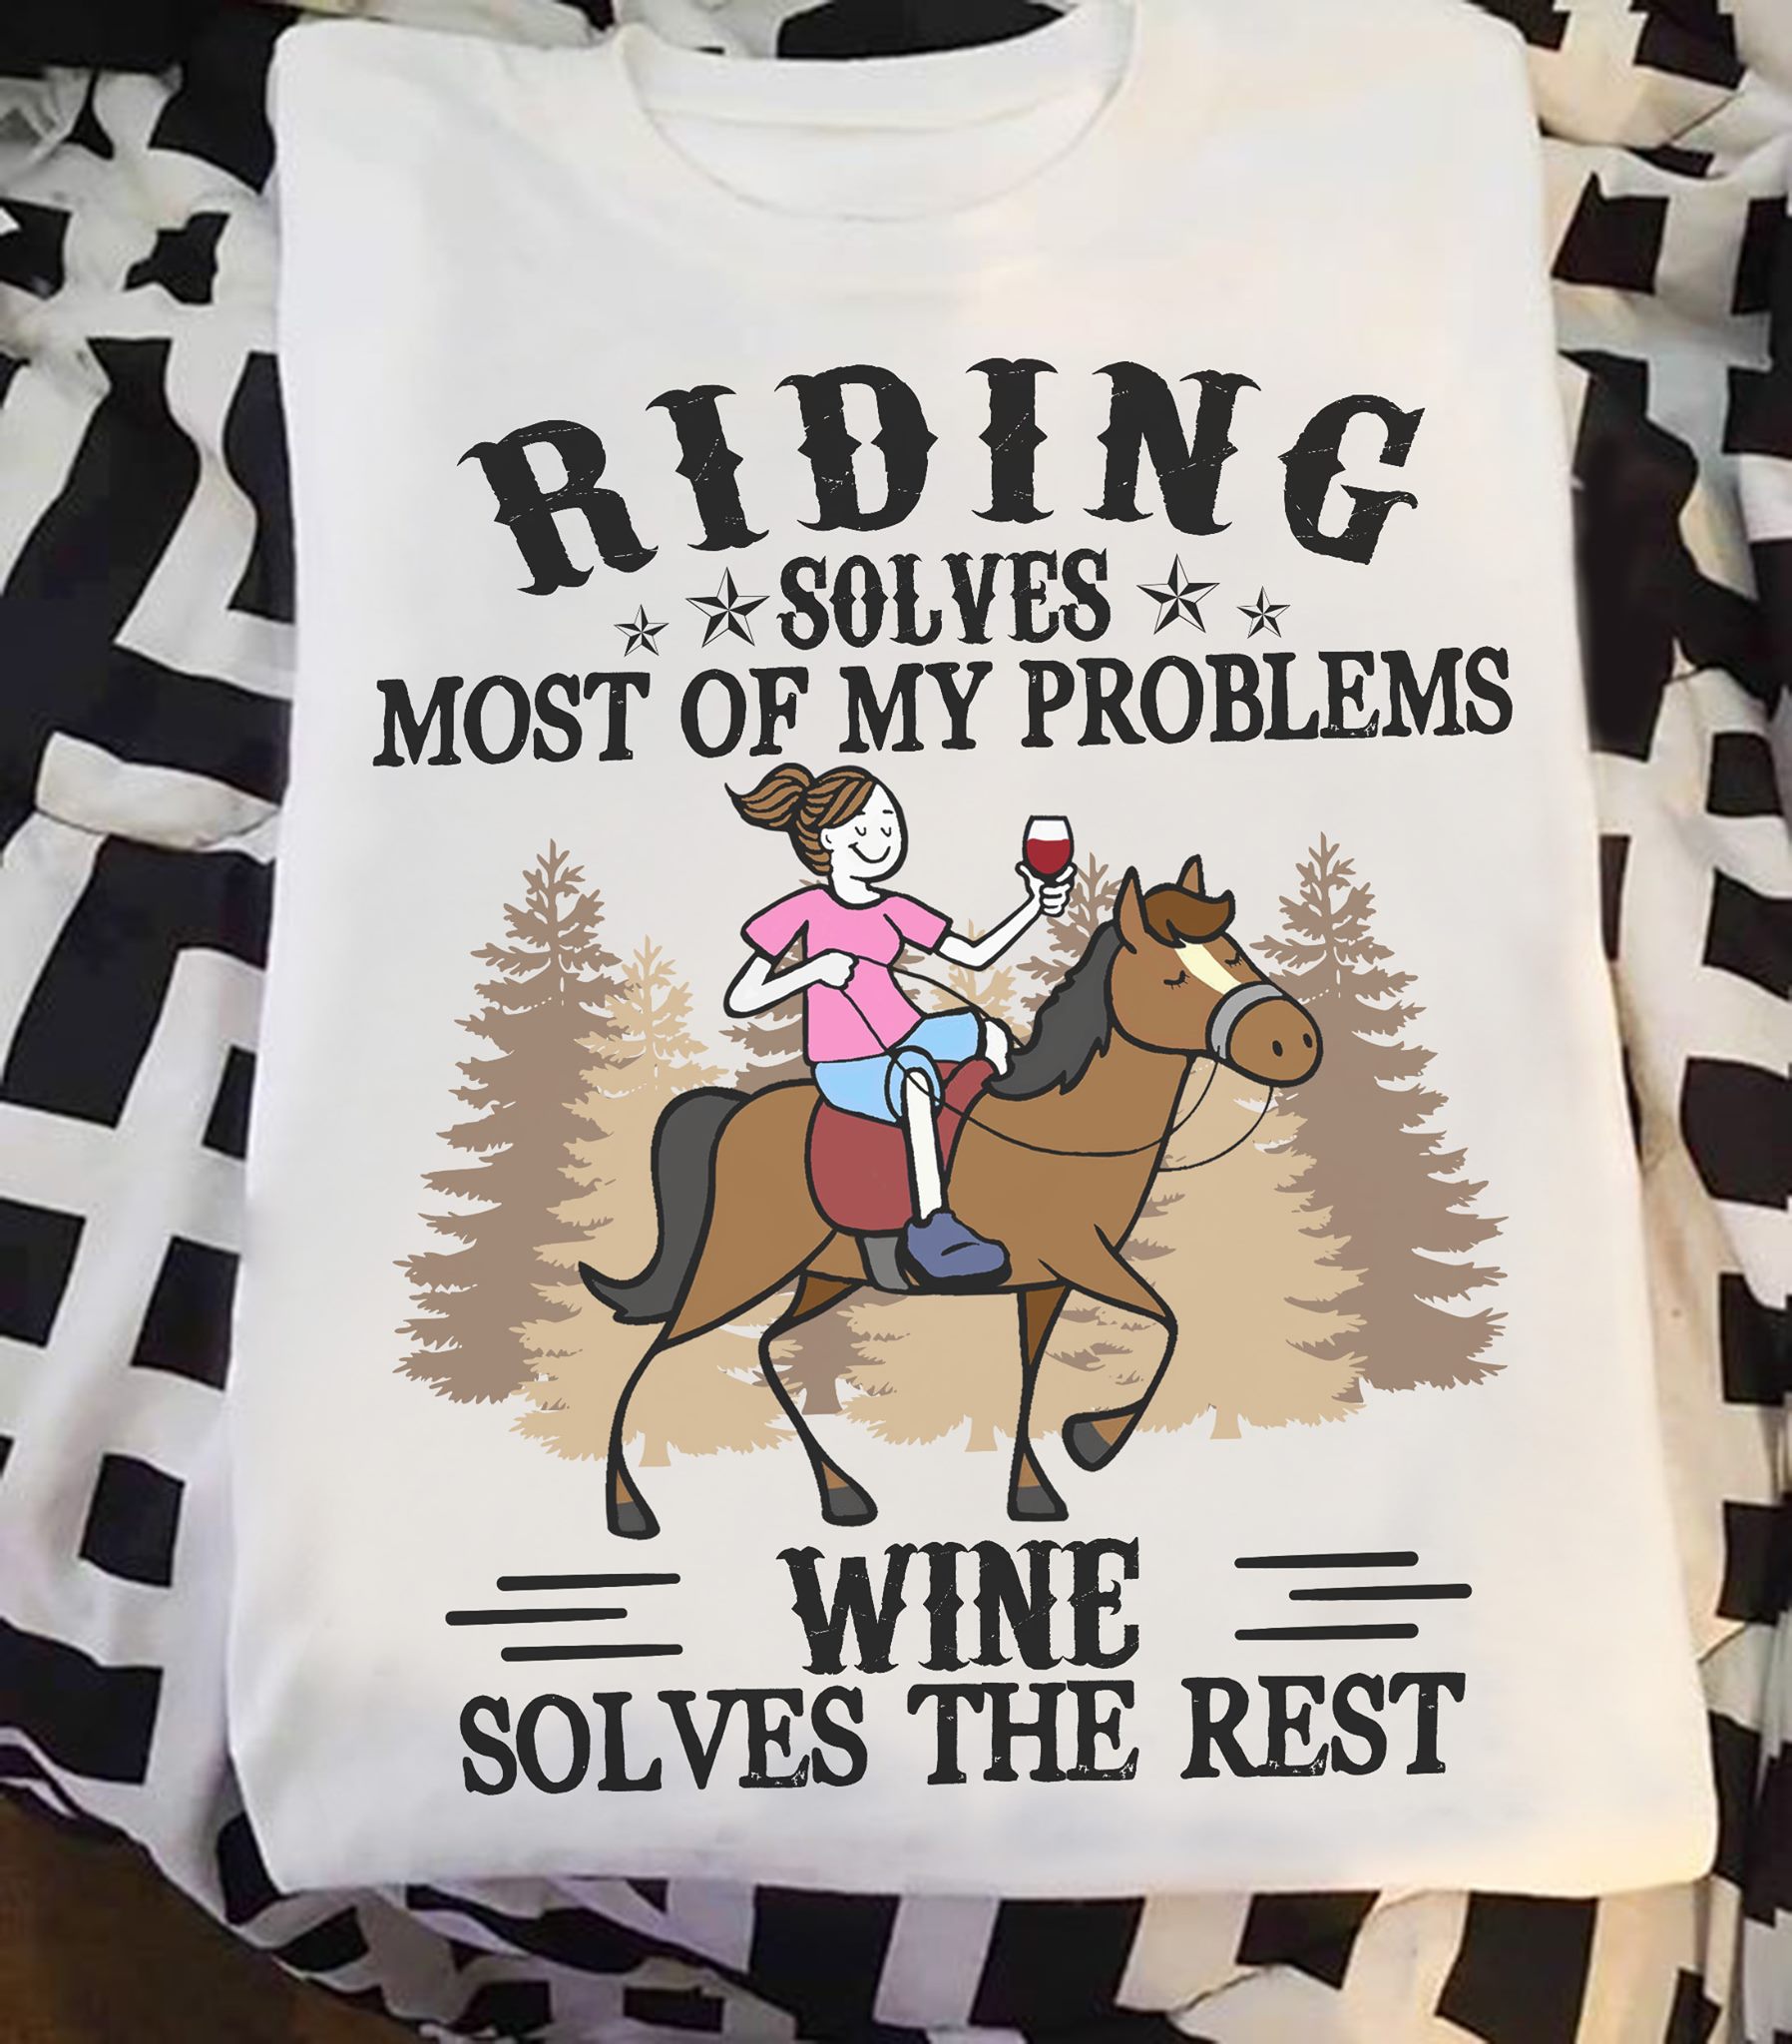 Riding solves most of my problems wine solves the rest